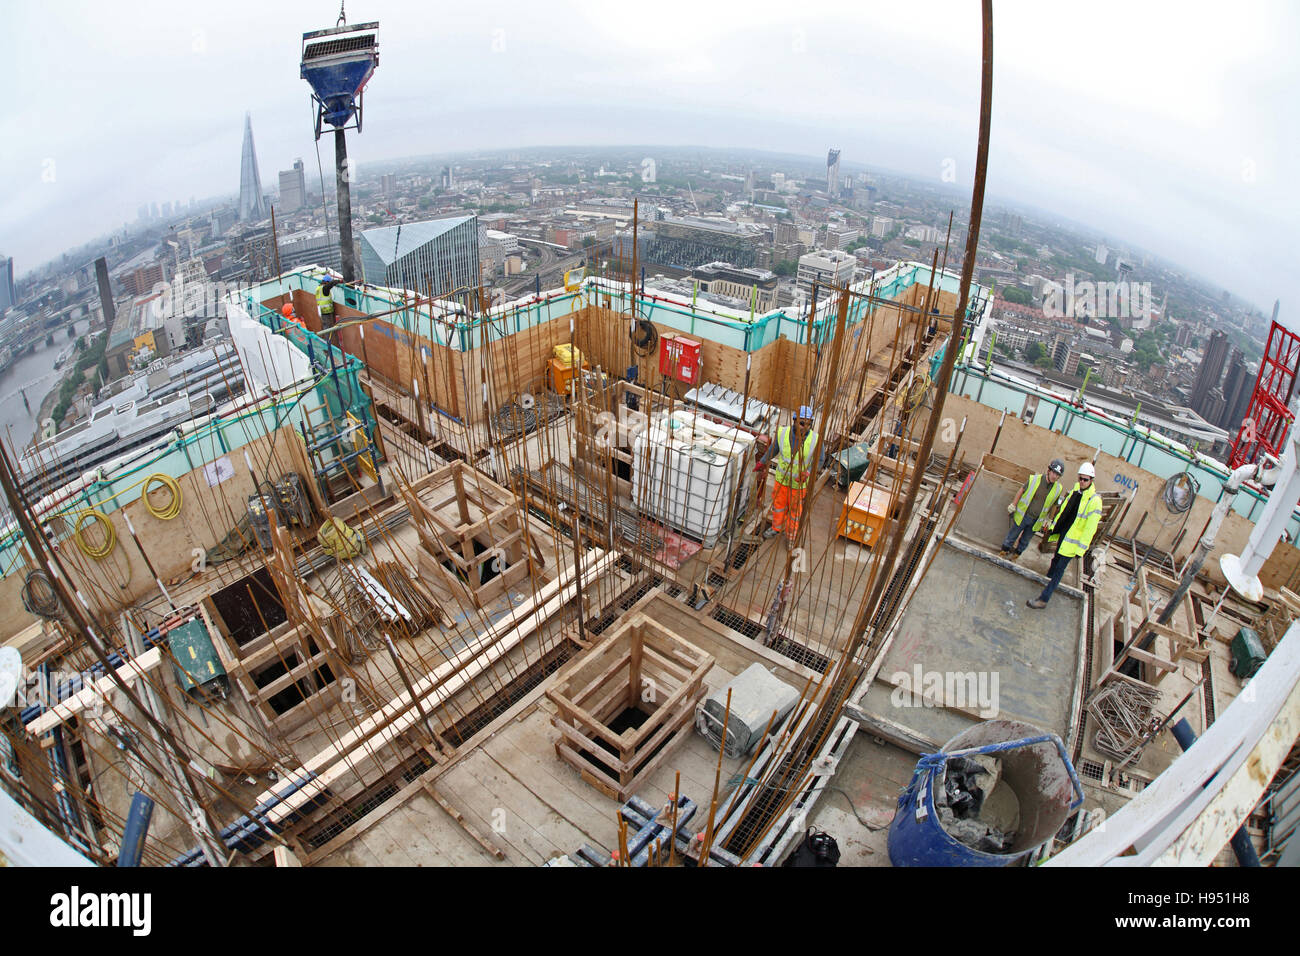 Construction of a new tower block on the south bank of the River Thames in London UK. Fish-eye view shows skyline beyond Stock Photo